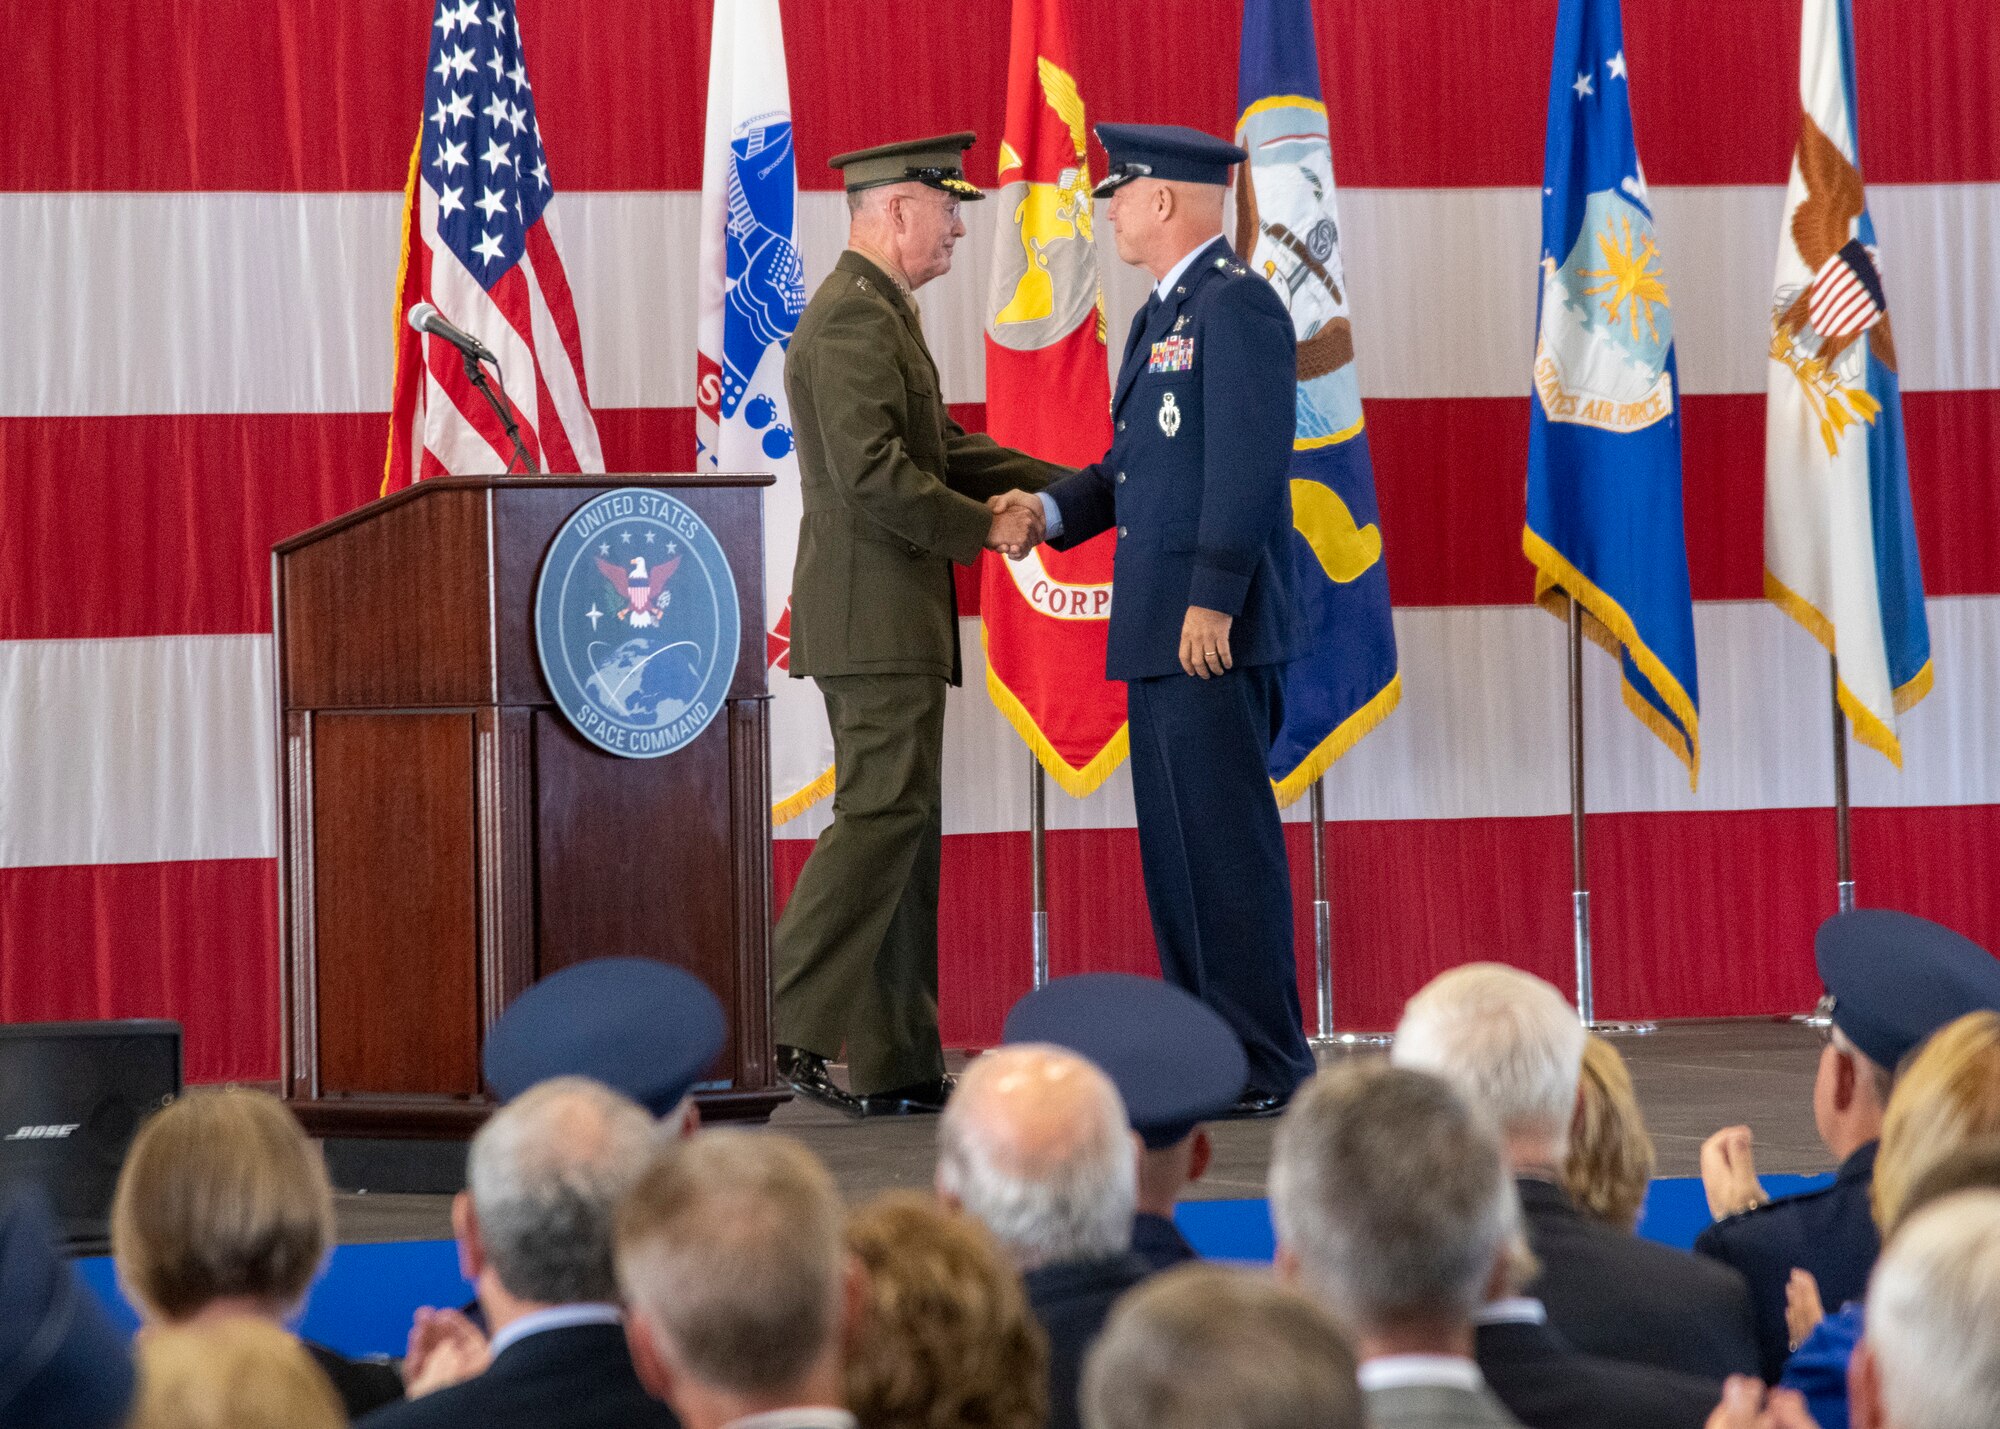 Marine Corps Gen. Joe Dunford, chairman of the Joint Chiefs of Staff, introduces Air Force Gen. John W. Raymond, commander, U.S. Space Command and Air Force Space Command, during the USSPACECOM Recognition and Establishment Ceremony at Peterson Air Force Base, Colorado Sept. 9, 2019.